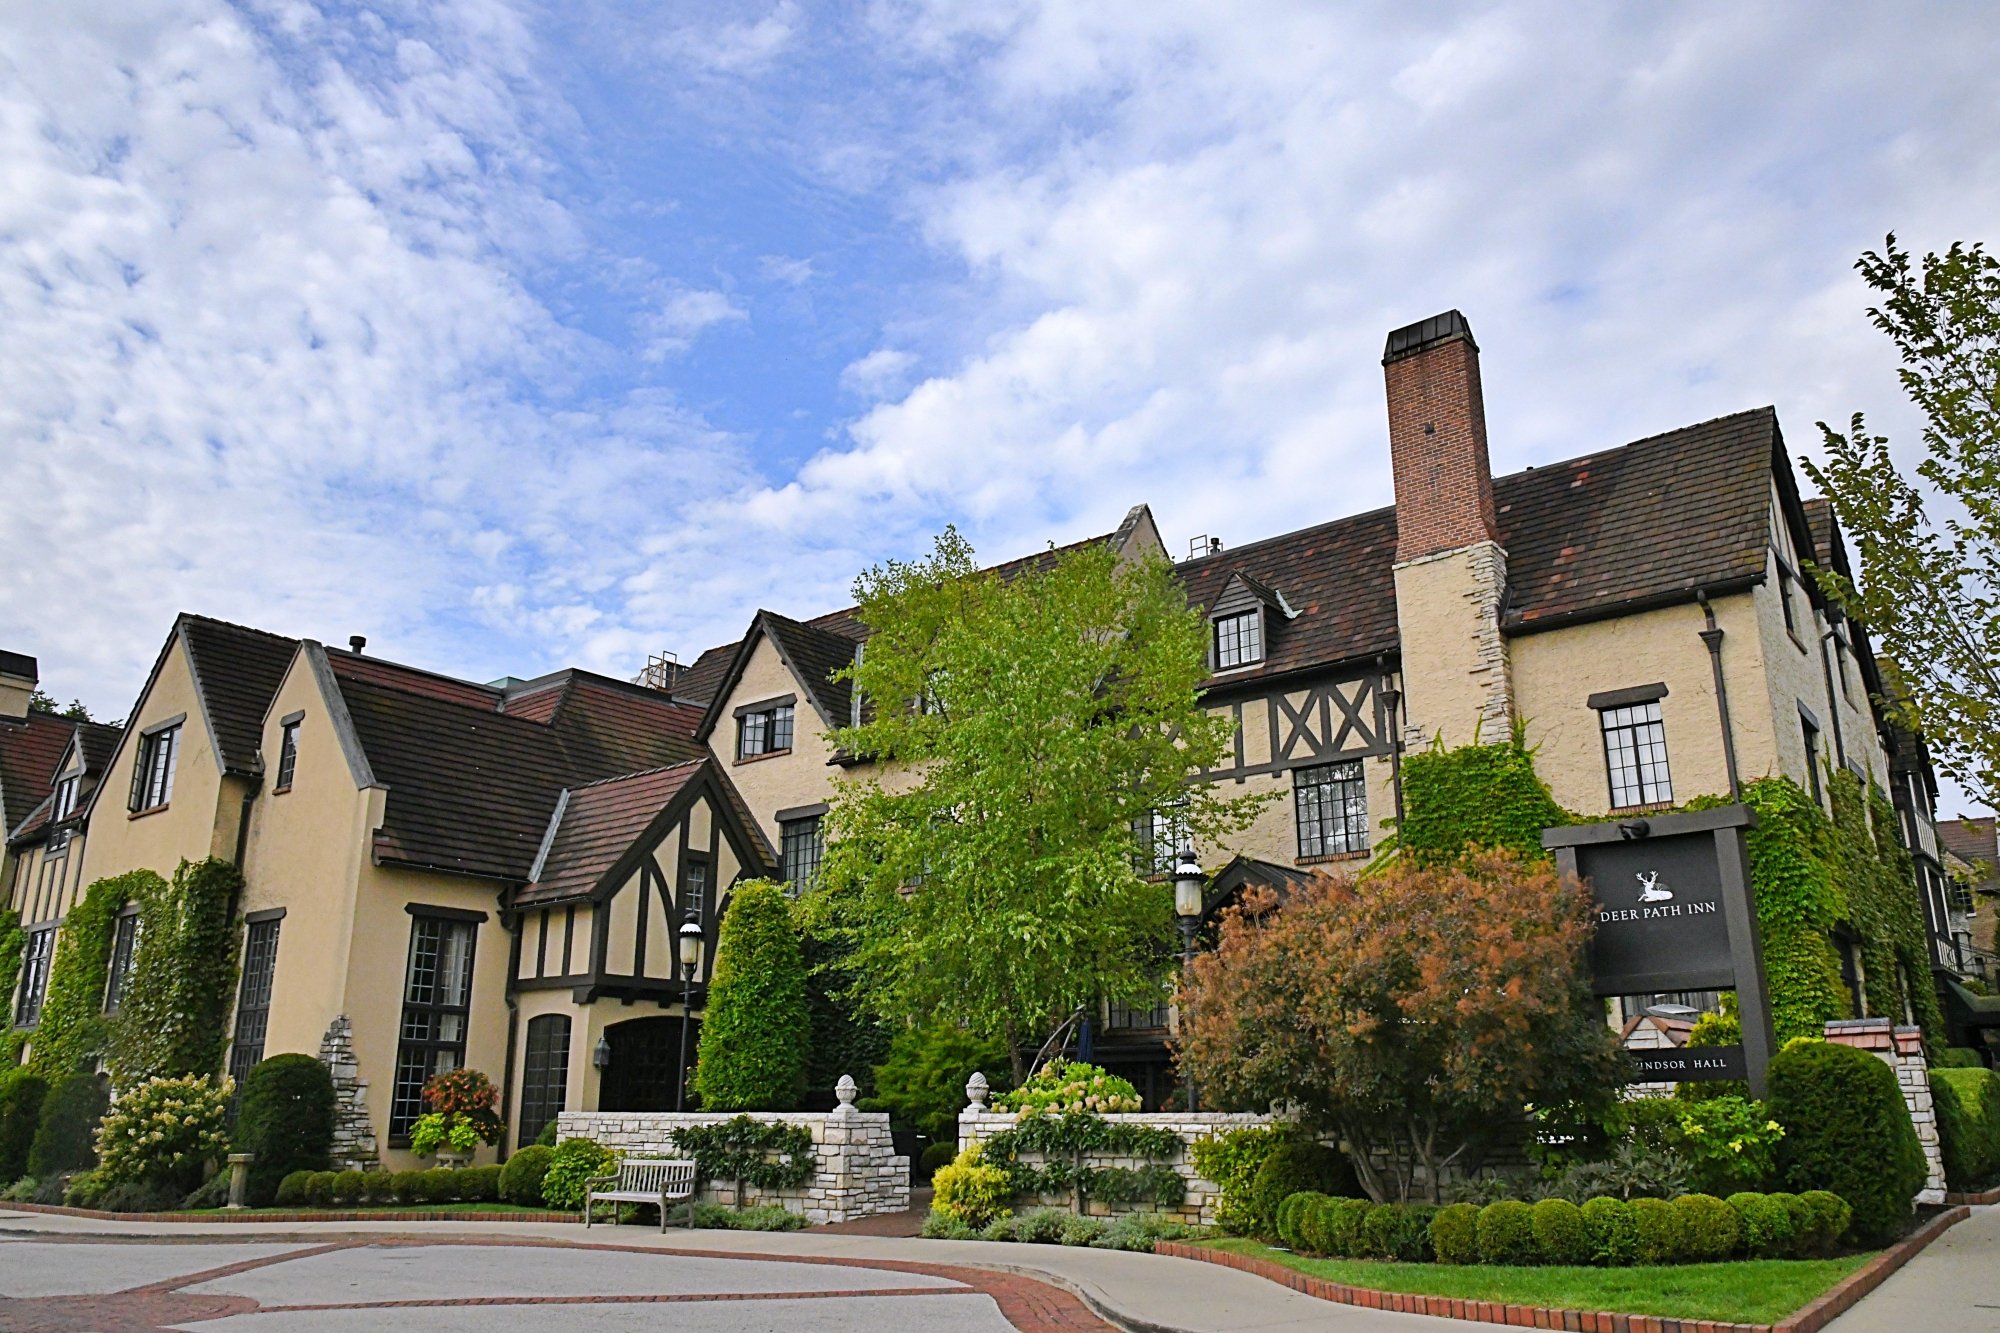 This English Manor-Inspired Historic Hotel In Illinois Is A Hidden Gem Perfect For A Getaway